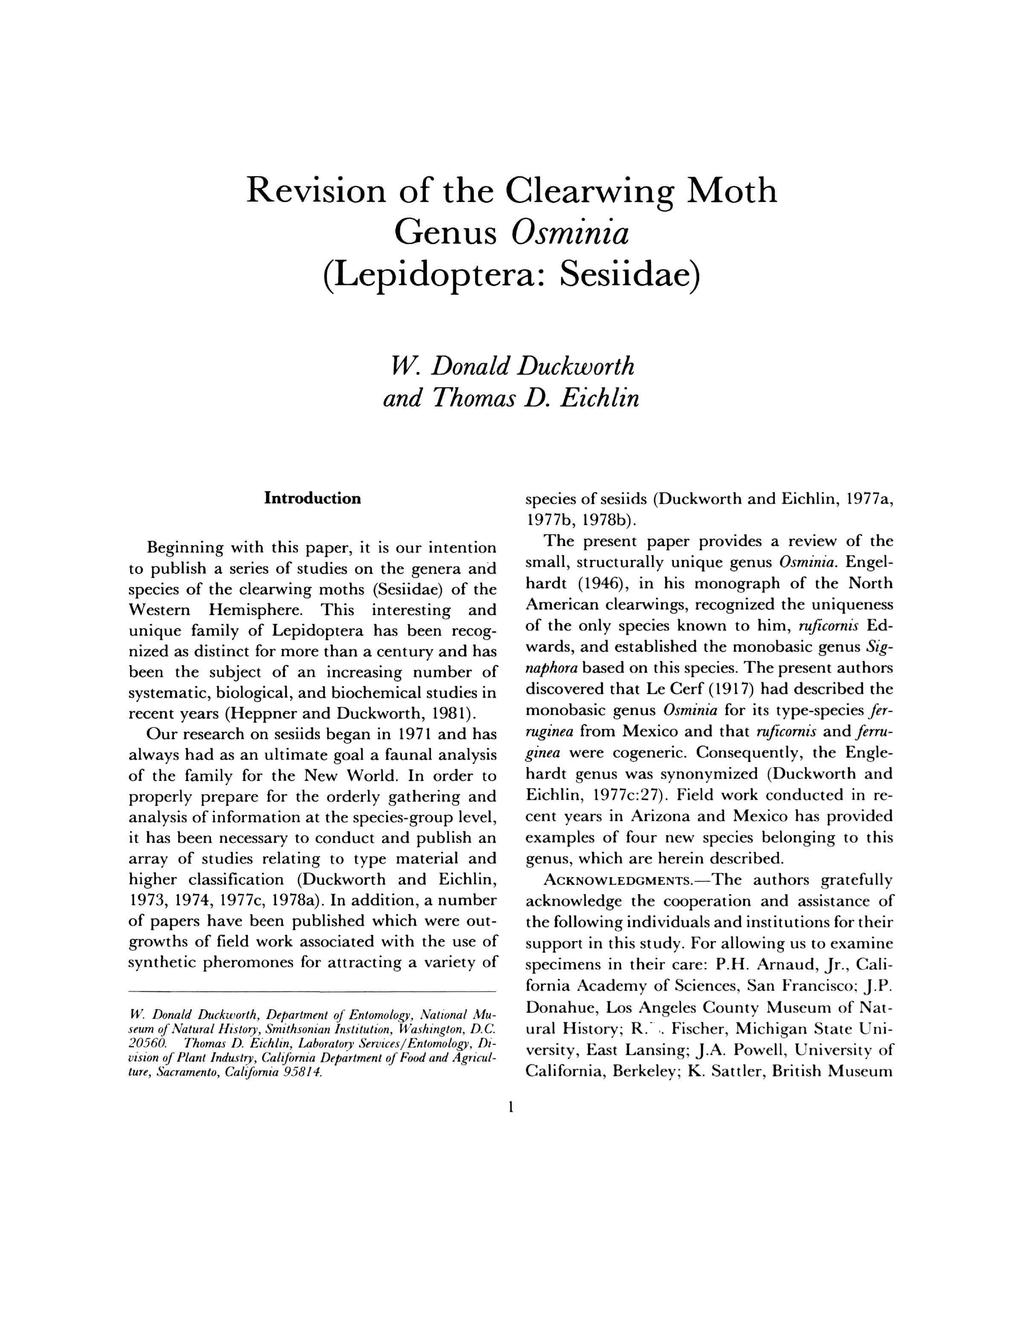 Revision of the Glearwing Moth Genus Osminia (Lepidoptera: Sesiidae) W. Donald Duckworth and Thomas D.